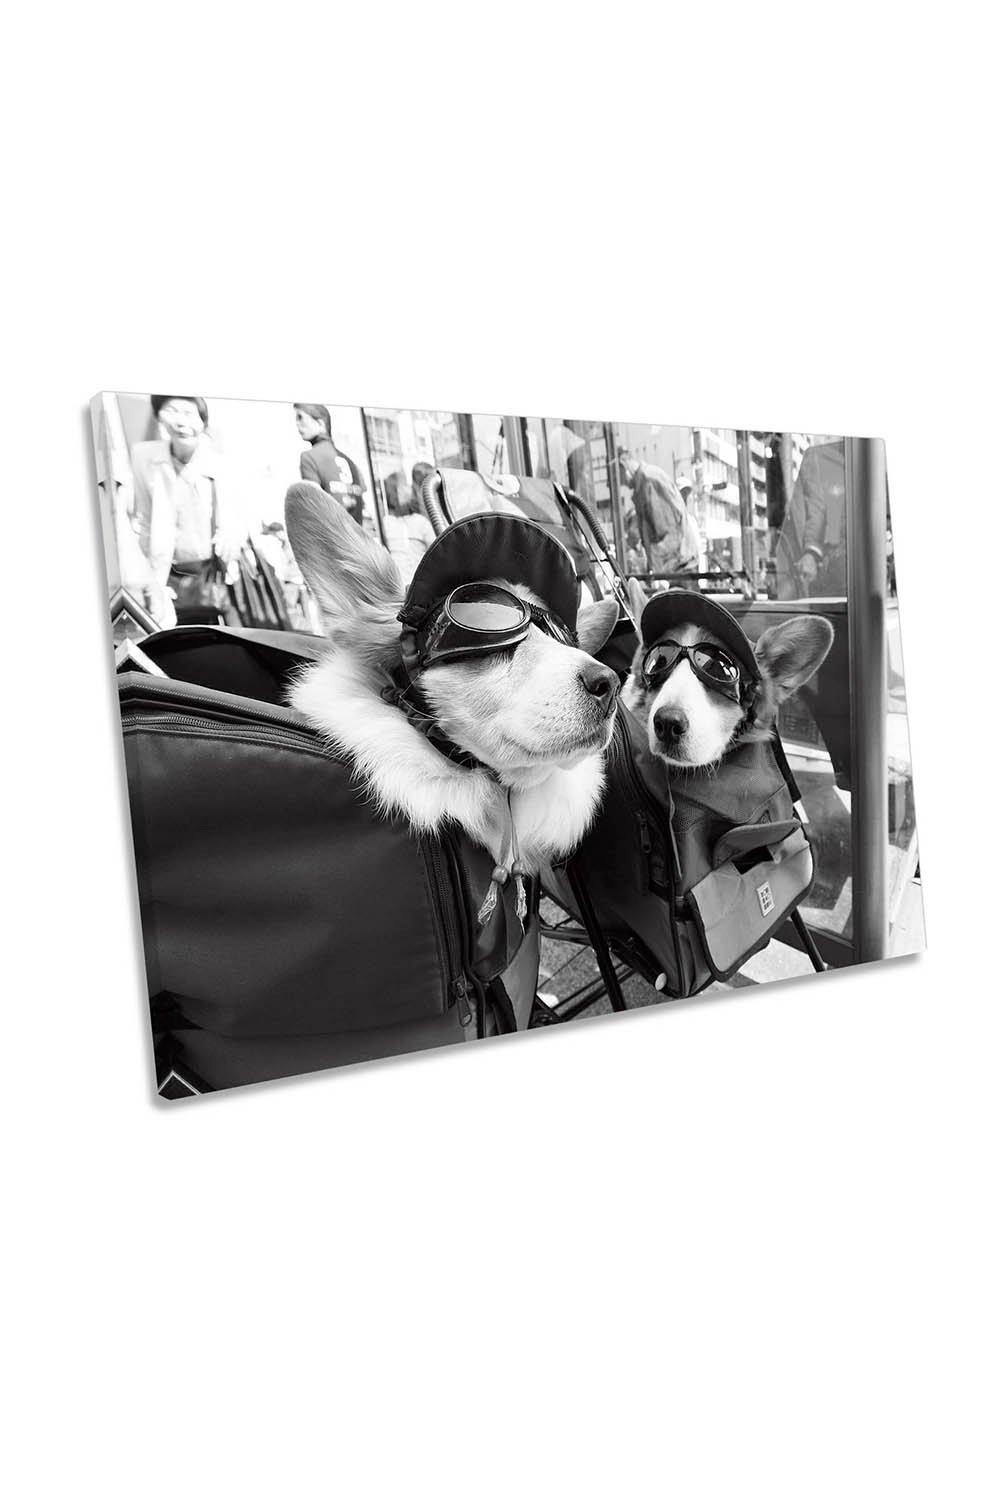 Conversation of the Corgi Dogs Canvas Wall Art Picture Print